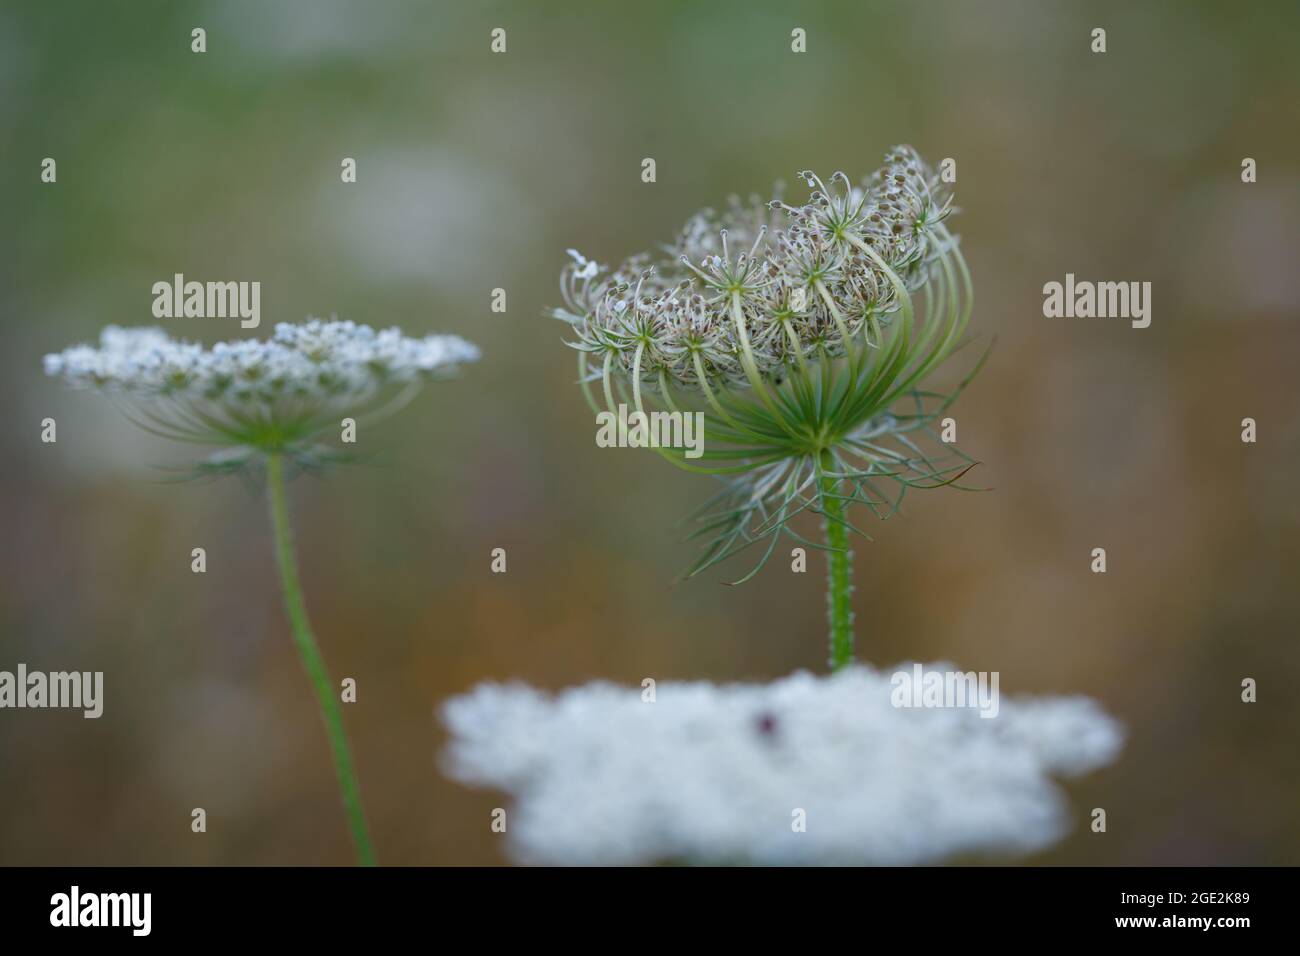 Umbel of white pinkish  flowers and forming fruit cluster (bird's nest) of Queen Anne's Lace or wild carrot (Daucus carota) plant in summer  meadow Stock Photo